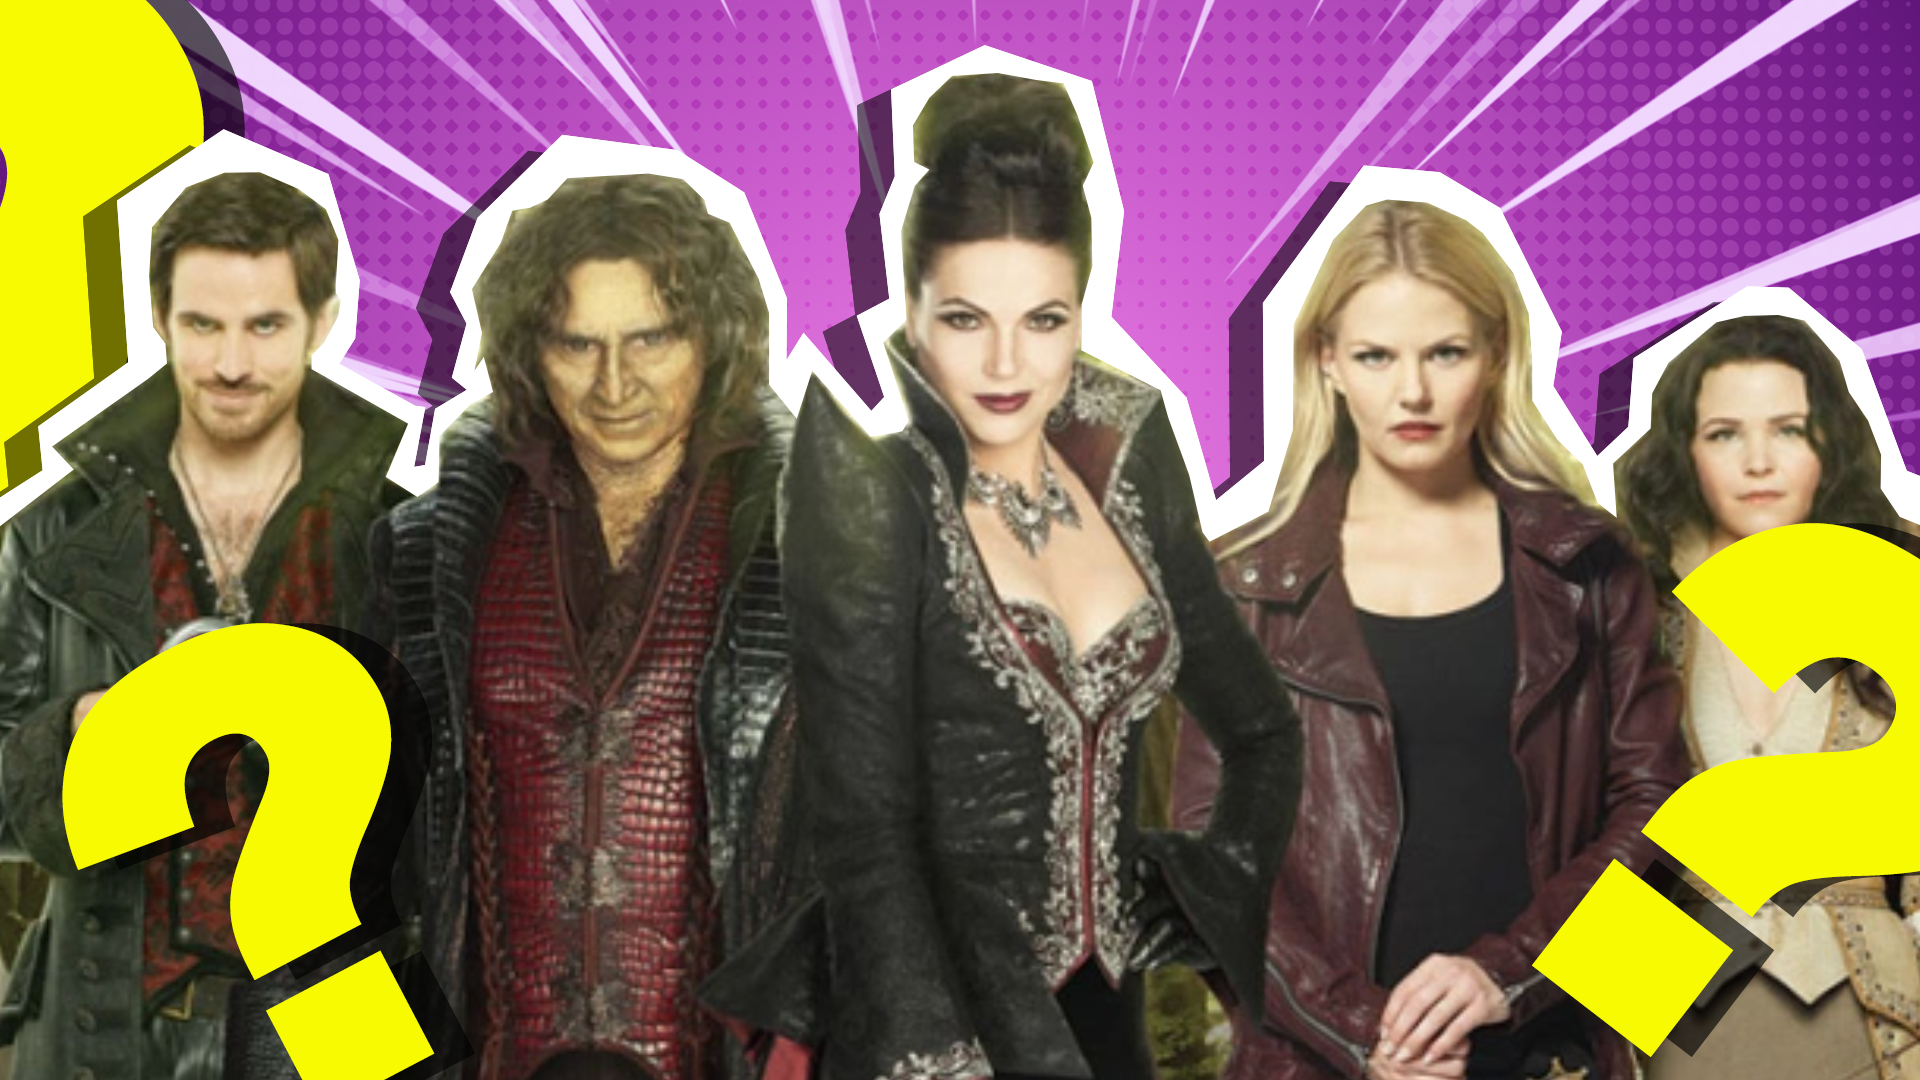 Once Upon a Time cast